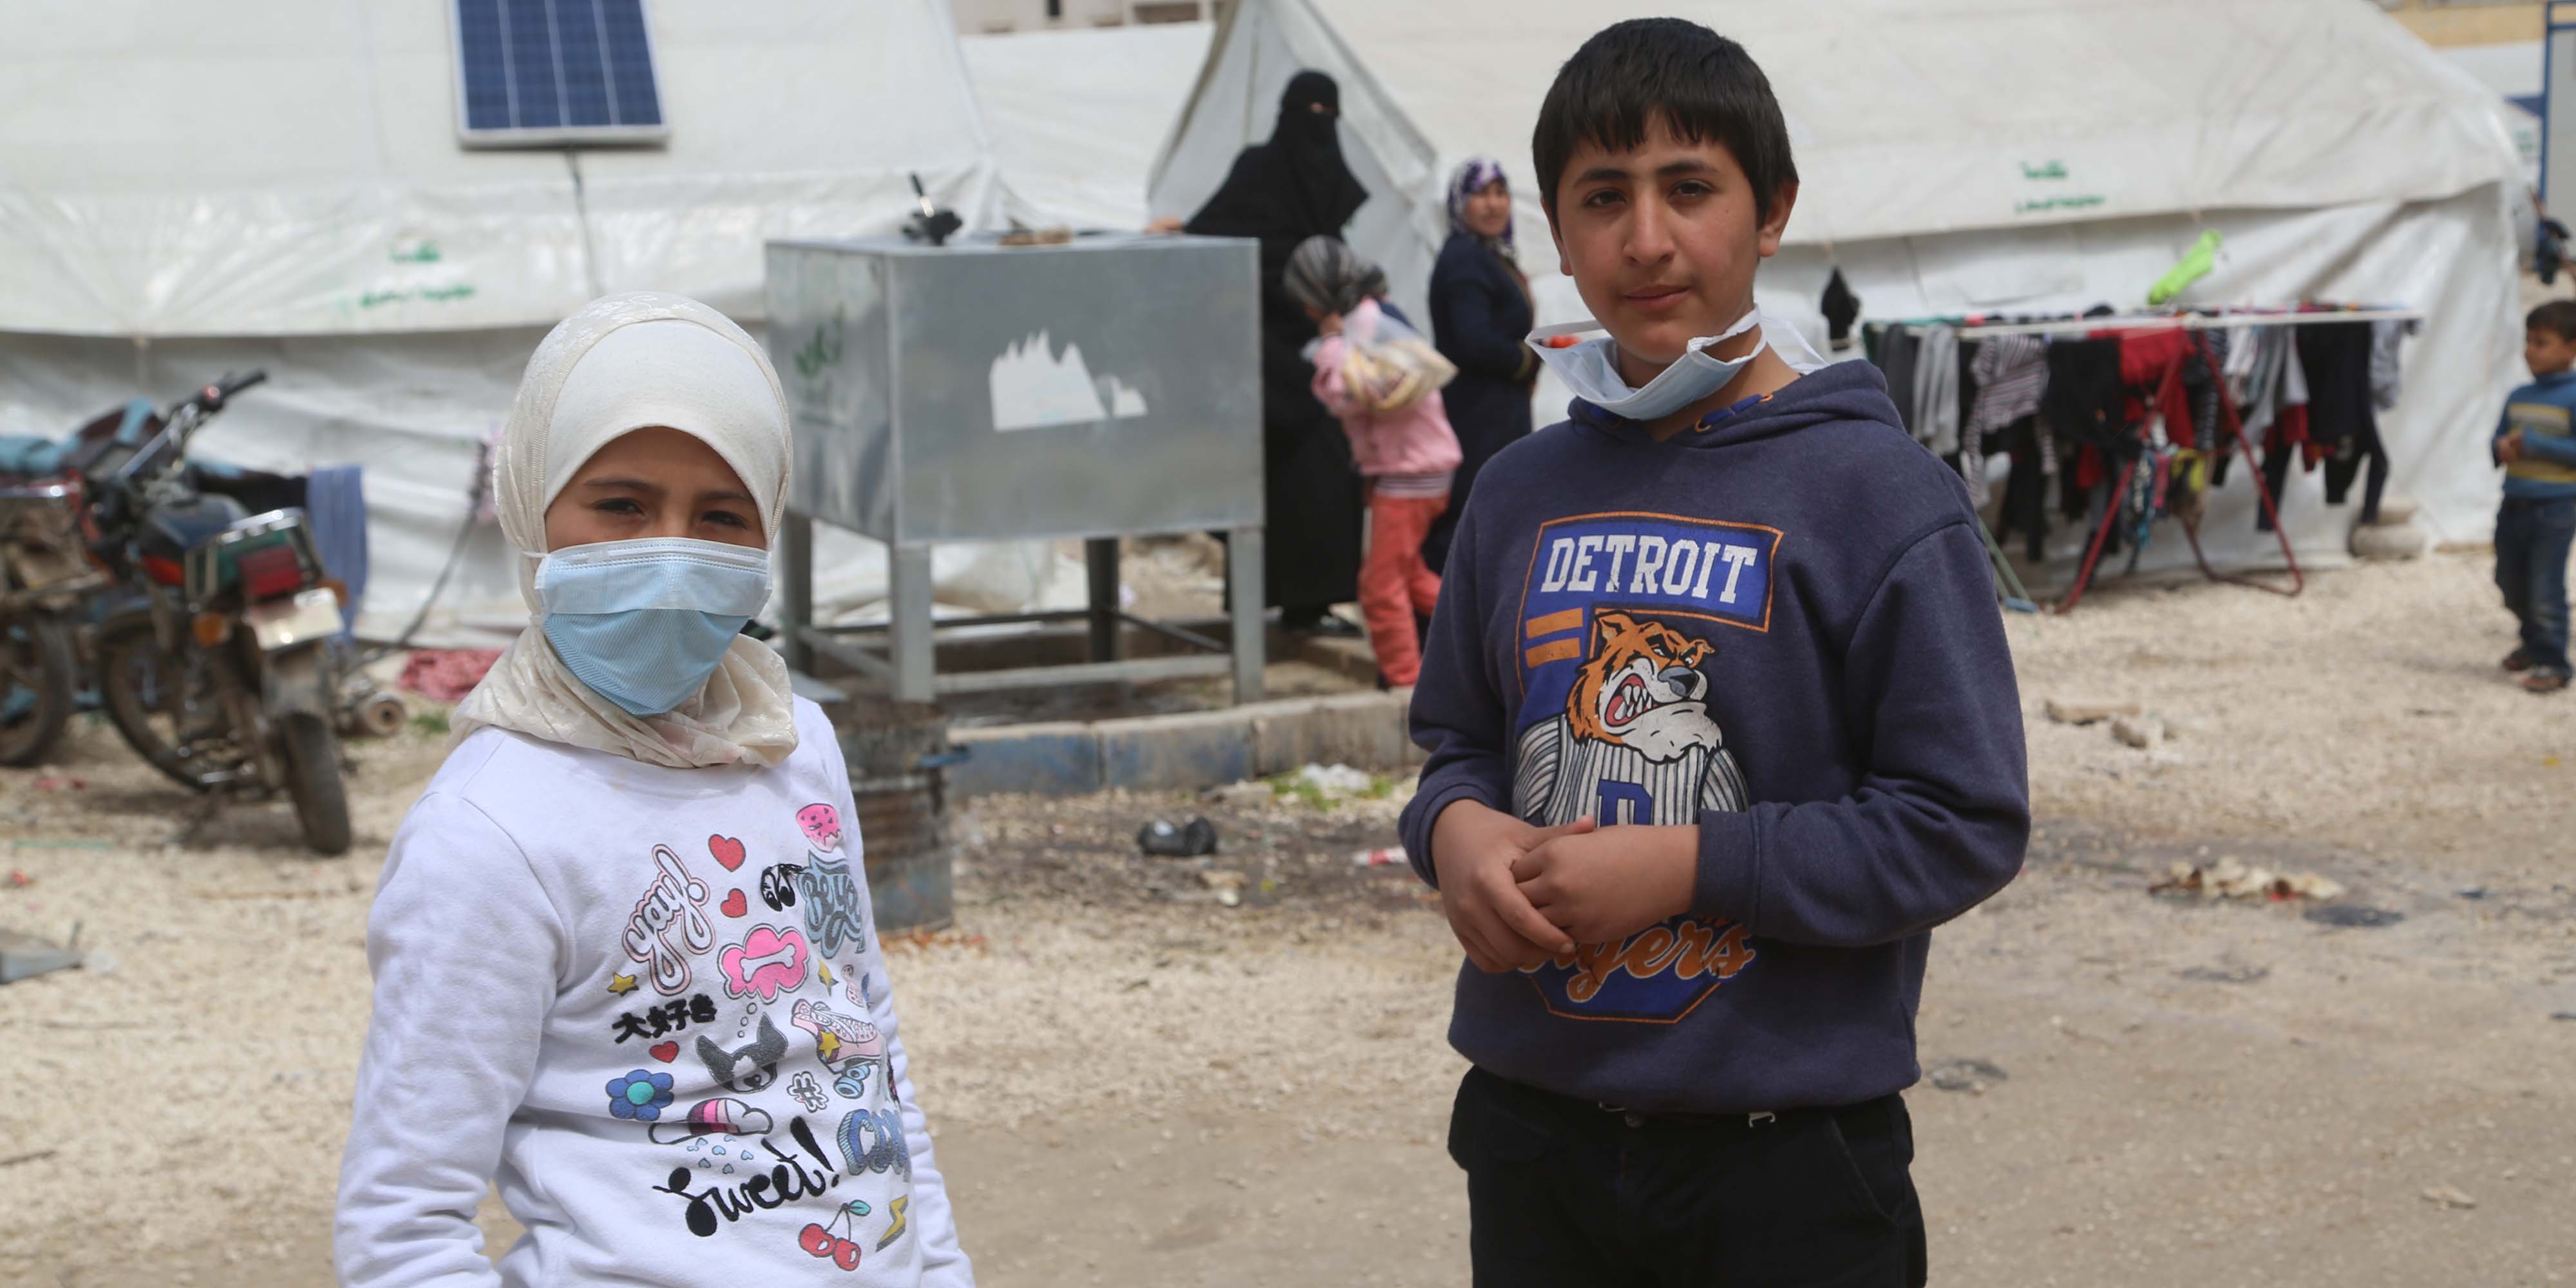 Syria, a brother and sister in a refugee camp look at the camera